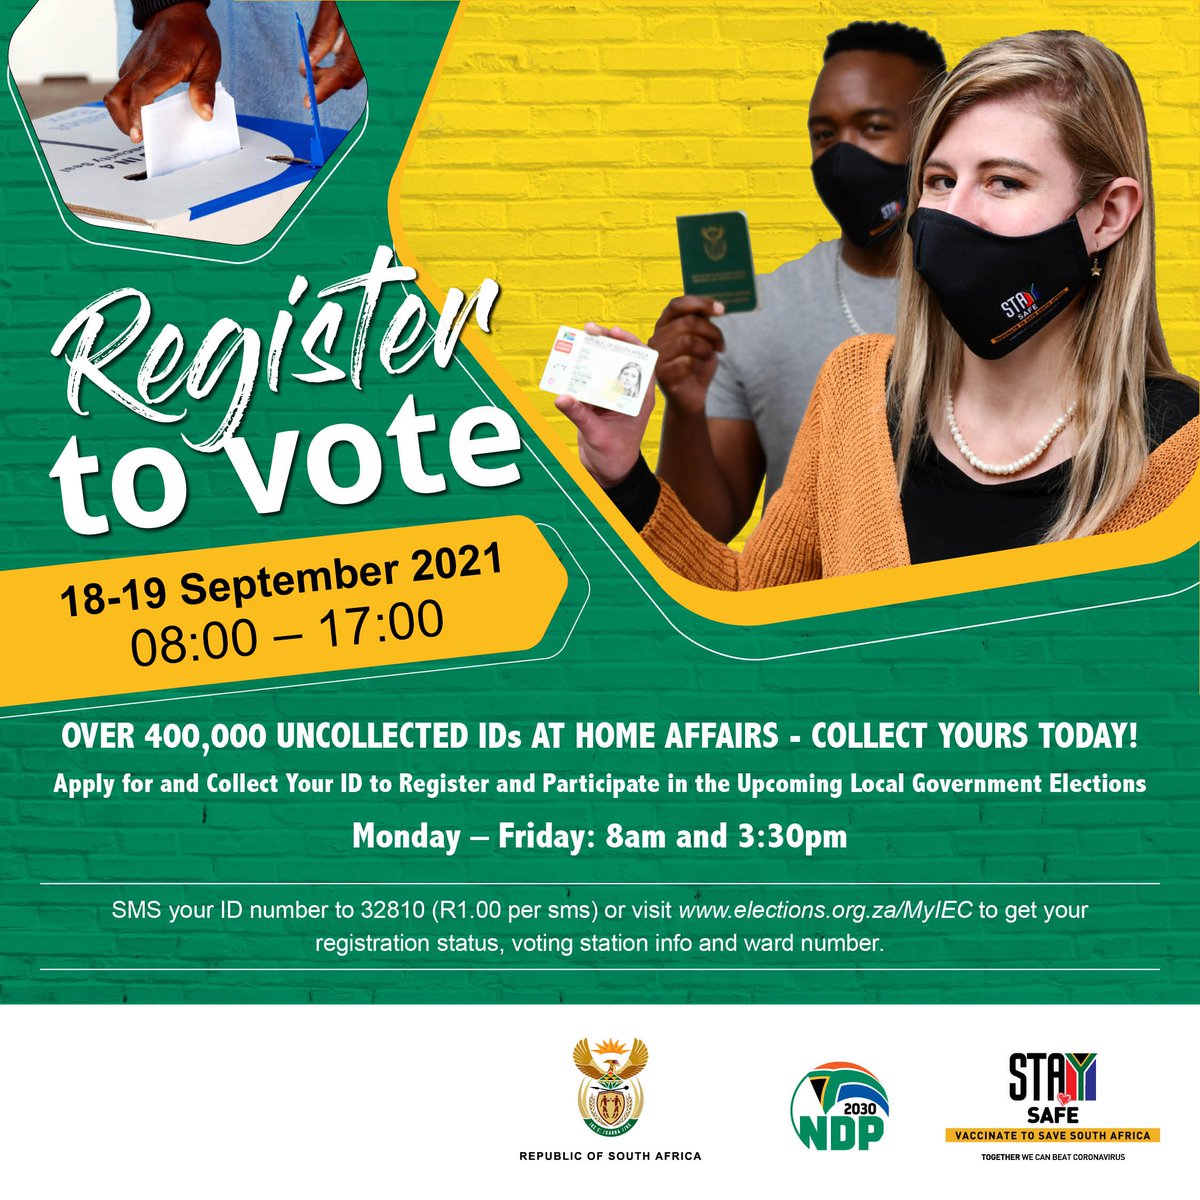 Remember, you can apply and collect your #ID or #SmartIDCard at @HomeAffairsSA offices today, 19 Sept, to register to vote in #LGE2021. Their offices will be open today until 5pm to coincide with our #RegWeekend hours. #EveryVoiceTogether